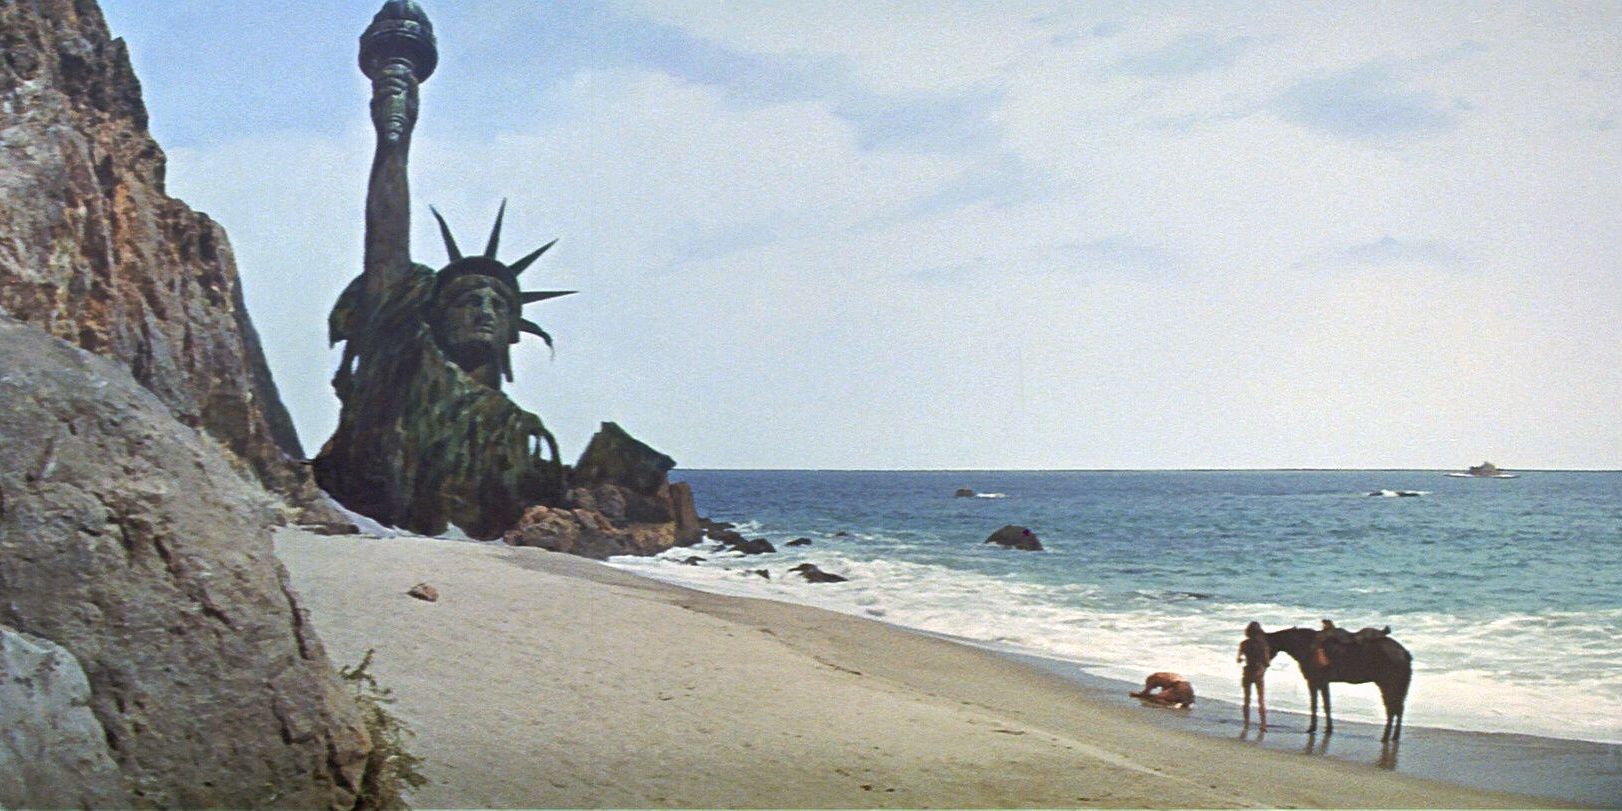 The Statue of Liberty poking out of the beach at the end of Planet of the Apes